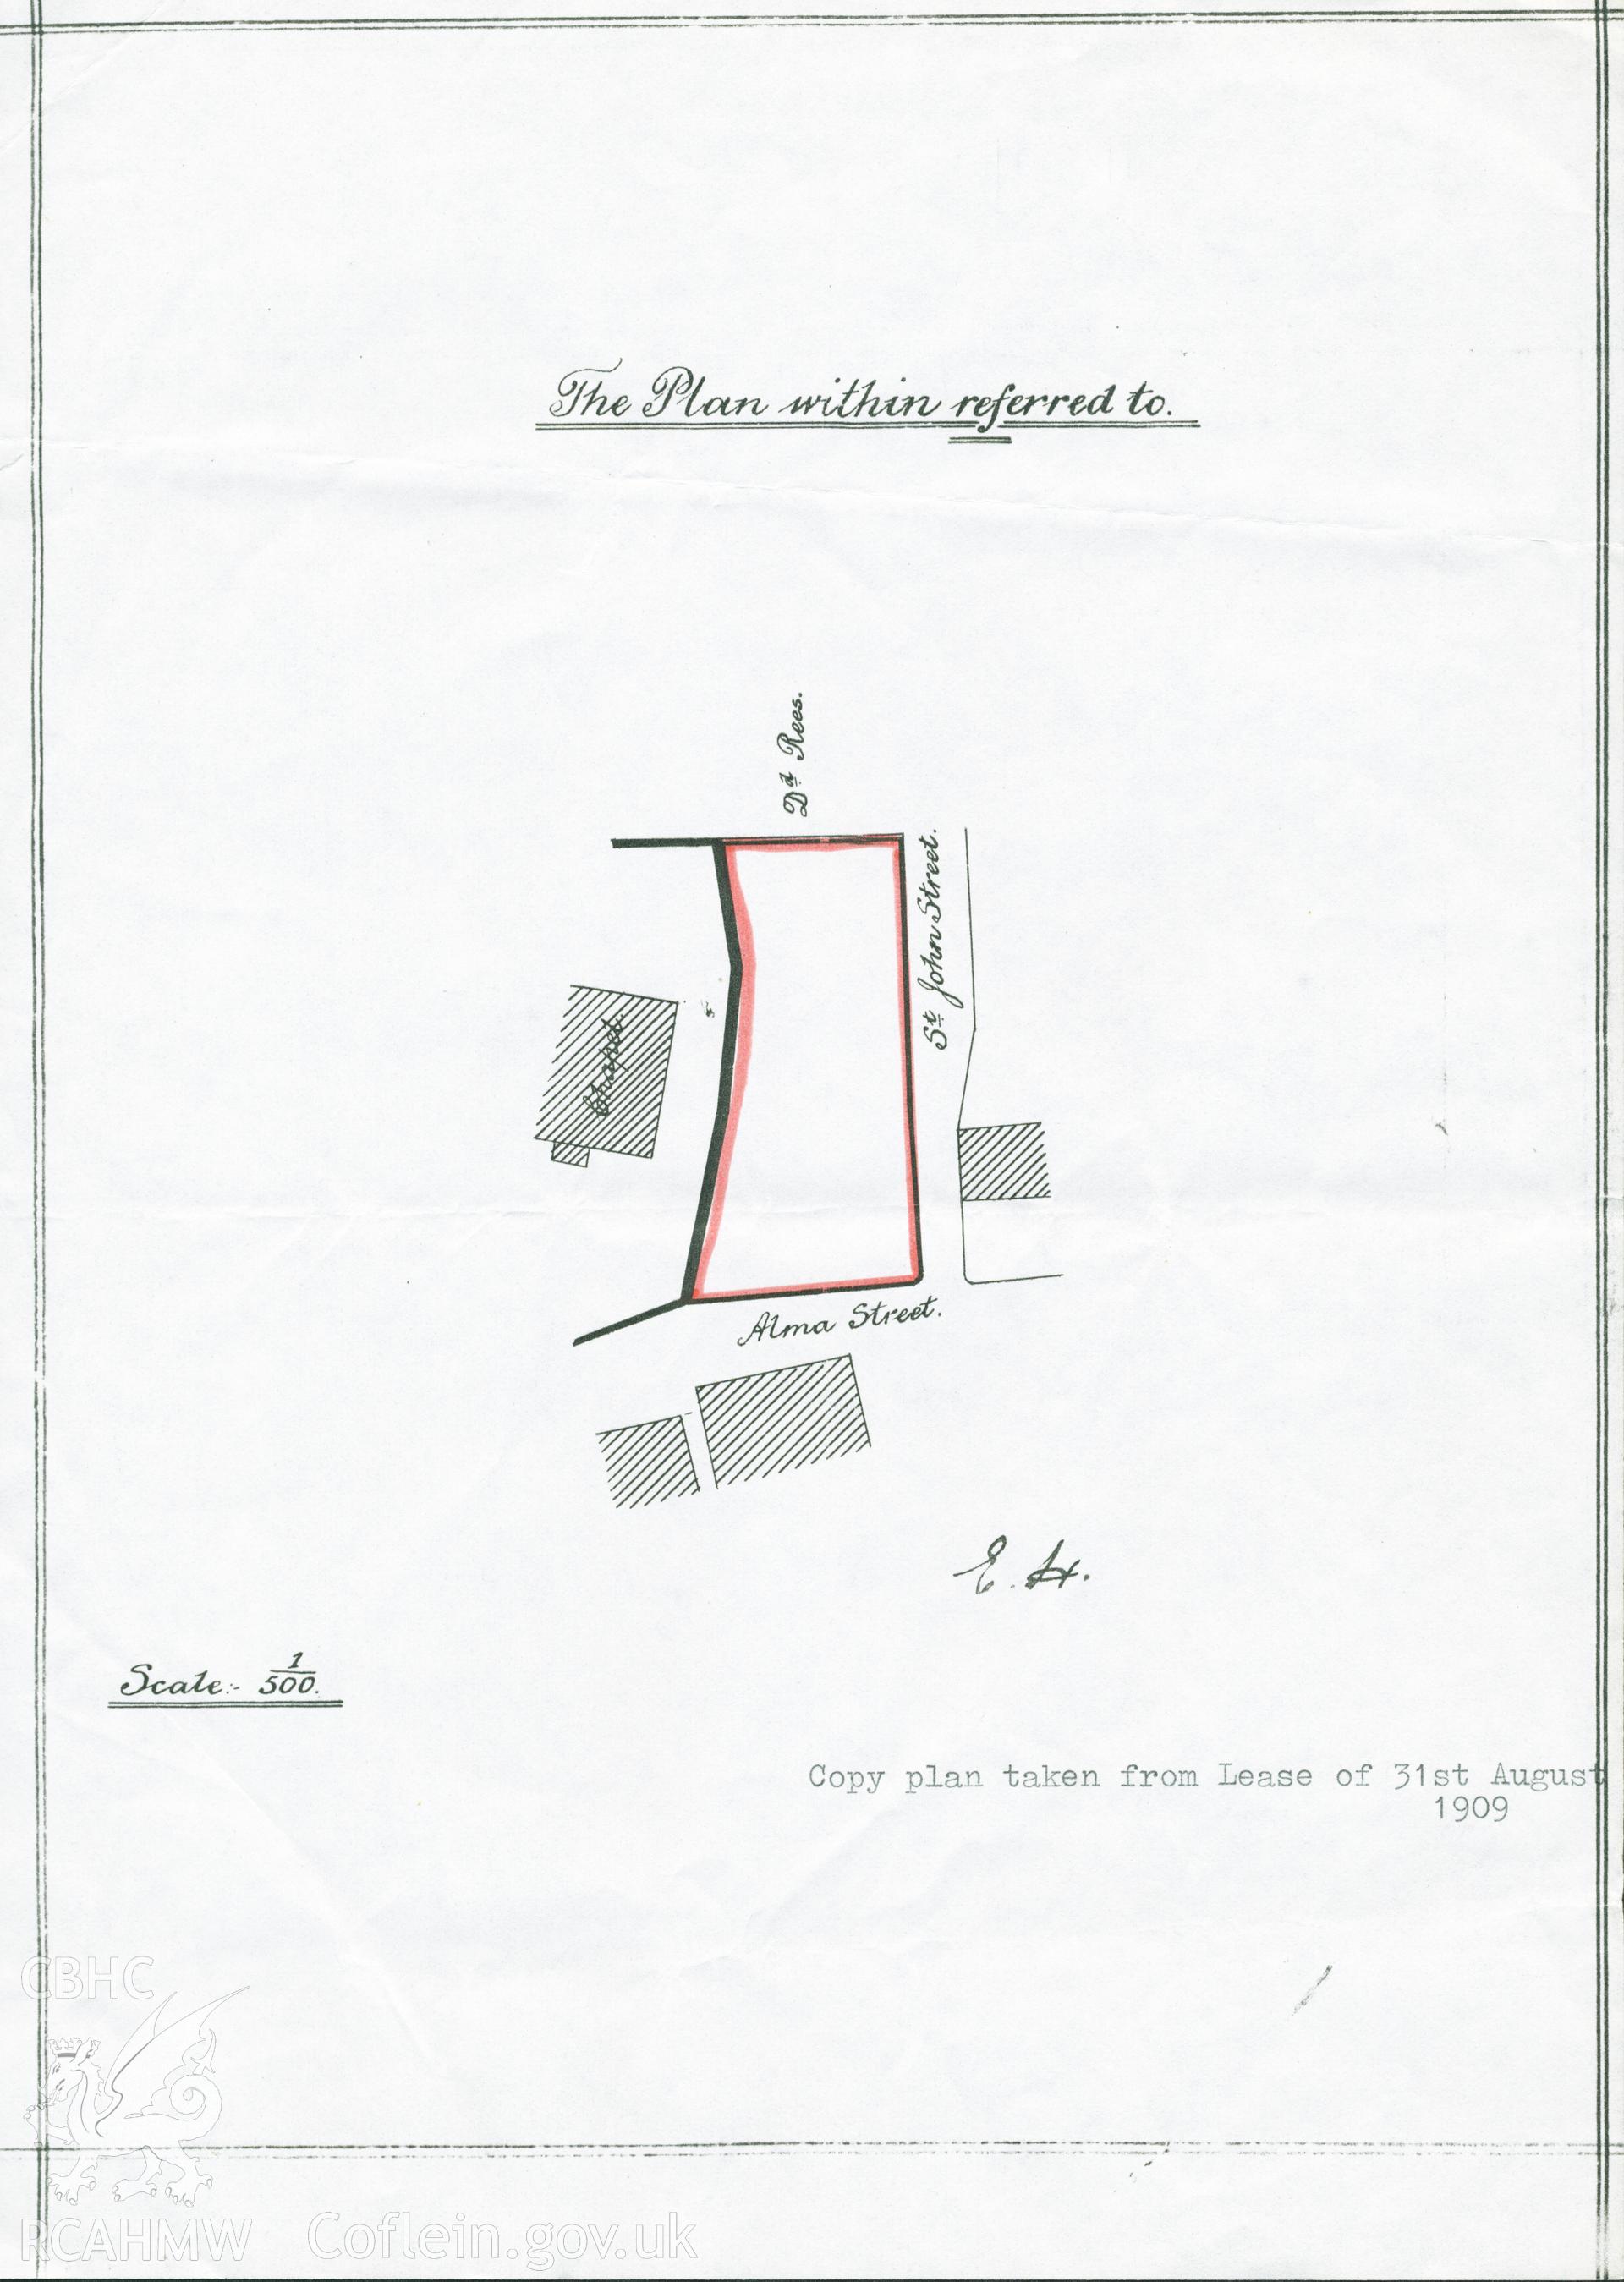 Plan of plot of land adjacent to Yr Hen Dy Cwrdd, Aberdare. Donated to the RCAHMW during the Digital Dissent Project.